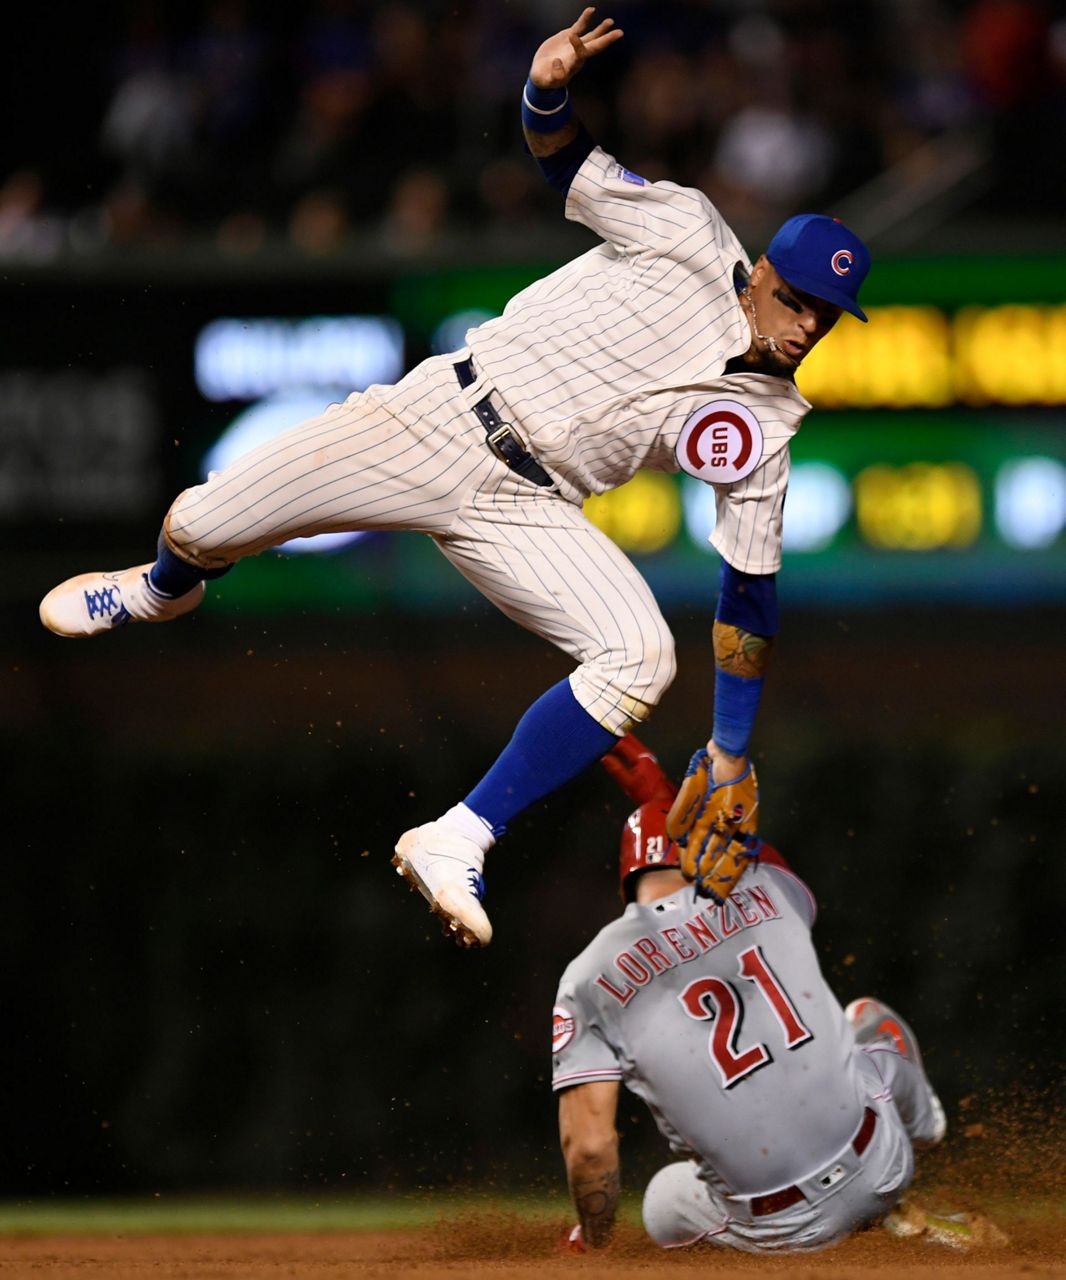 Schwarber S Homer In 10th Gives Cubs 4 3 Win Over Reds